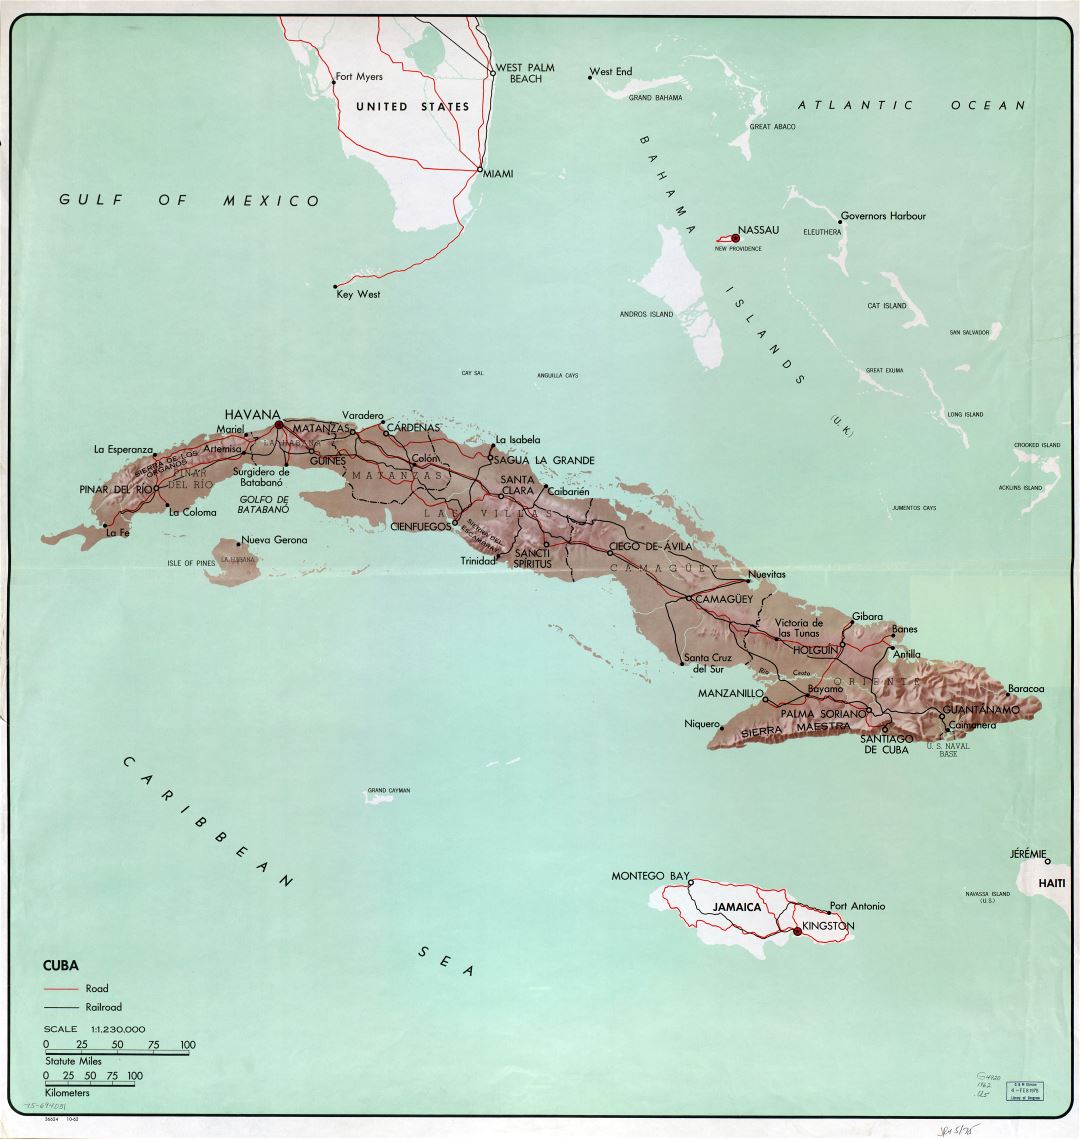 Large scale detailed political and administrative map of Cuba with relief, roads, railroads and major cities - 1962